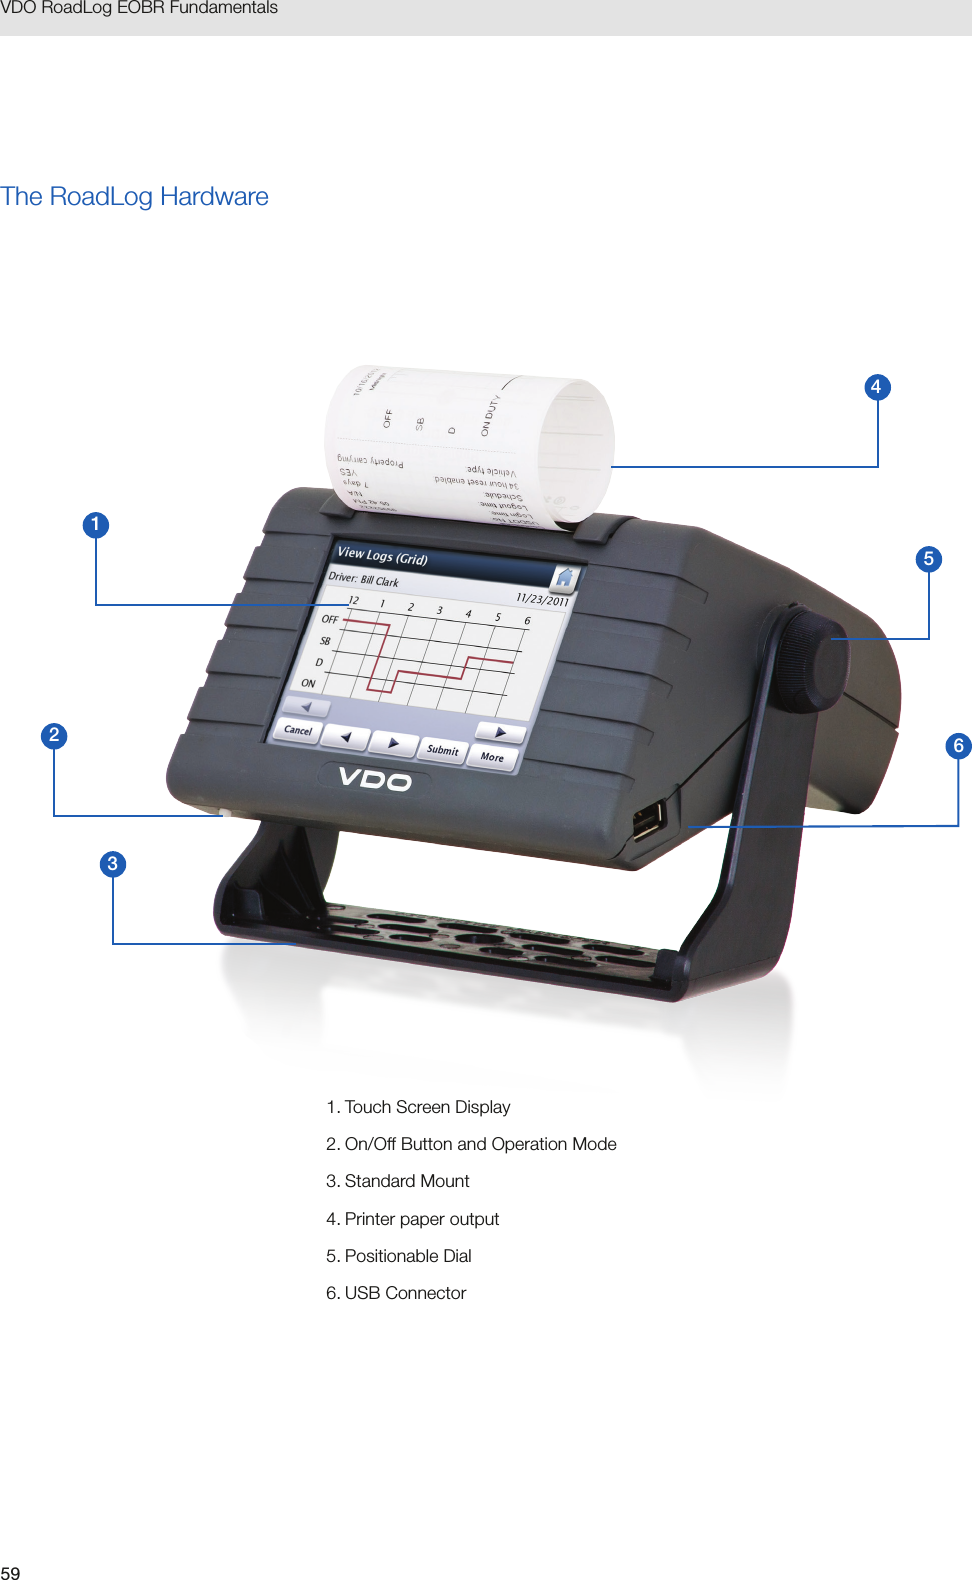 59VDO RoadLog EOBR Fundamentals The RoadLog Hardware1. Touch Screen Display2.   On/Off Button and Operation Mode 3.  Standard  Mount4. Printer paper output5. Positionable Dial 6. USB Connector412356